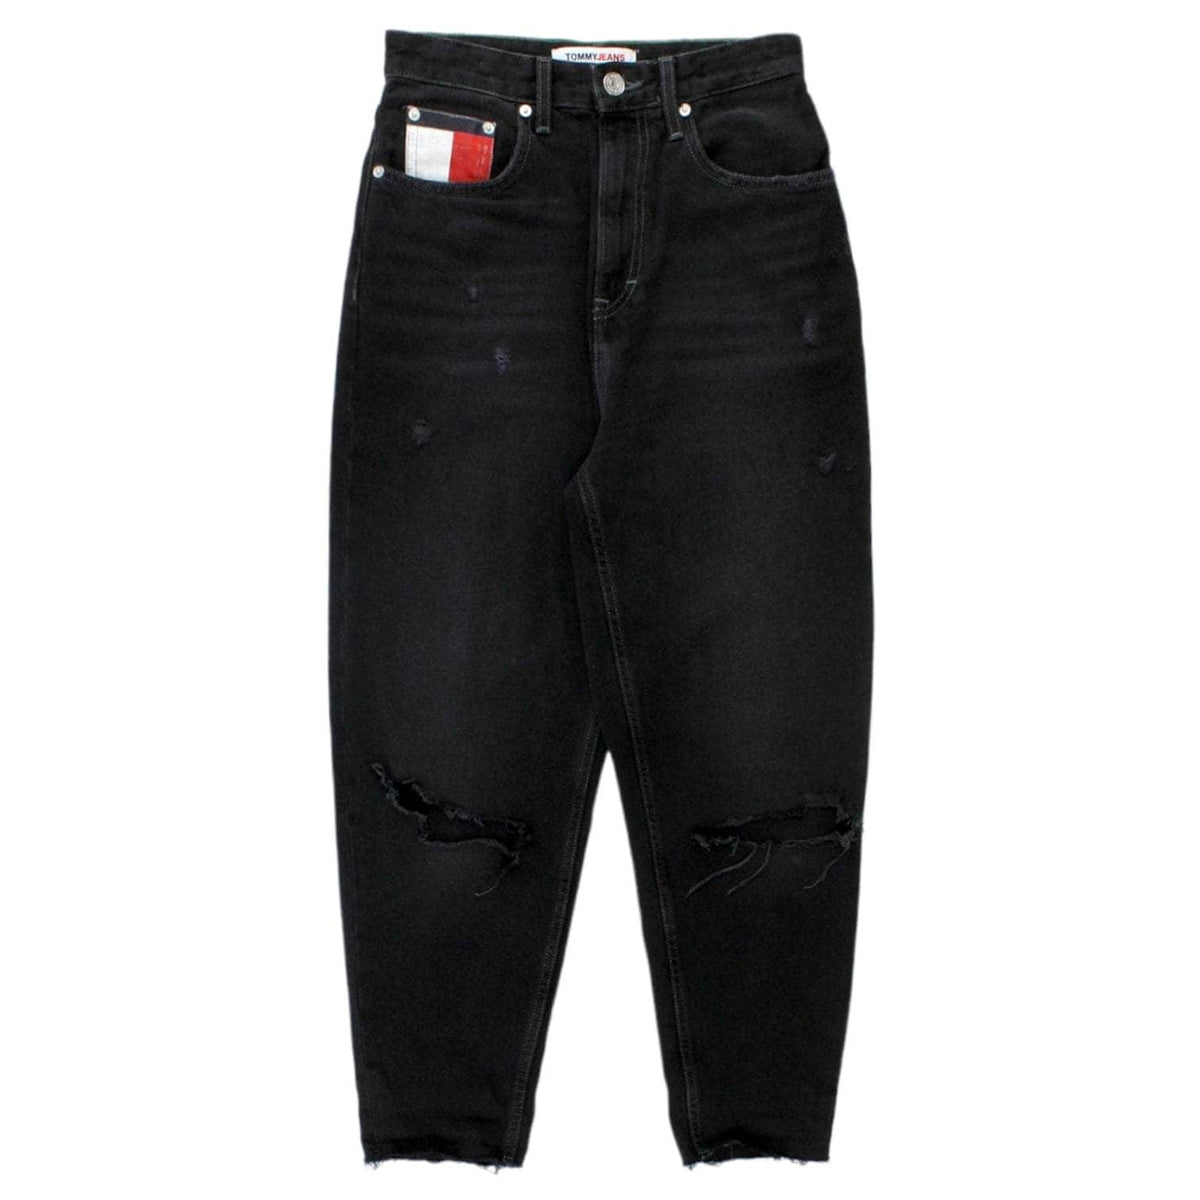 Tommy Jeans Black Distressed & Ripped Jeans